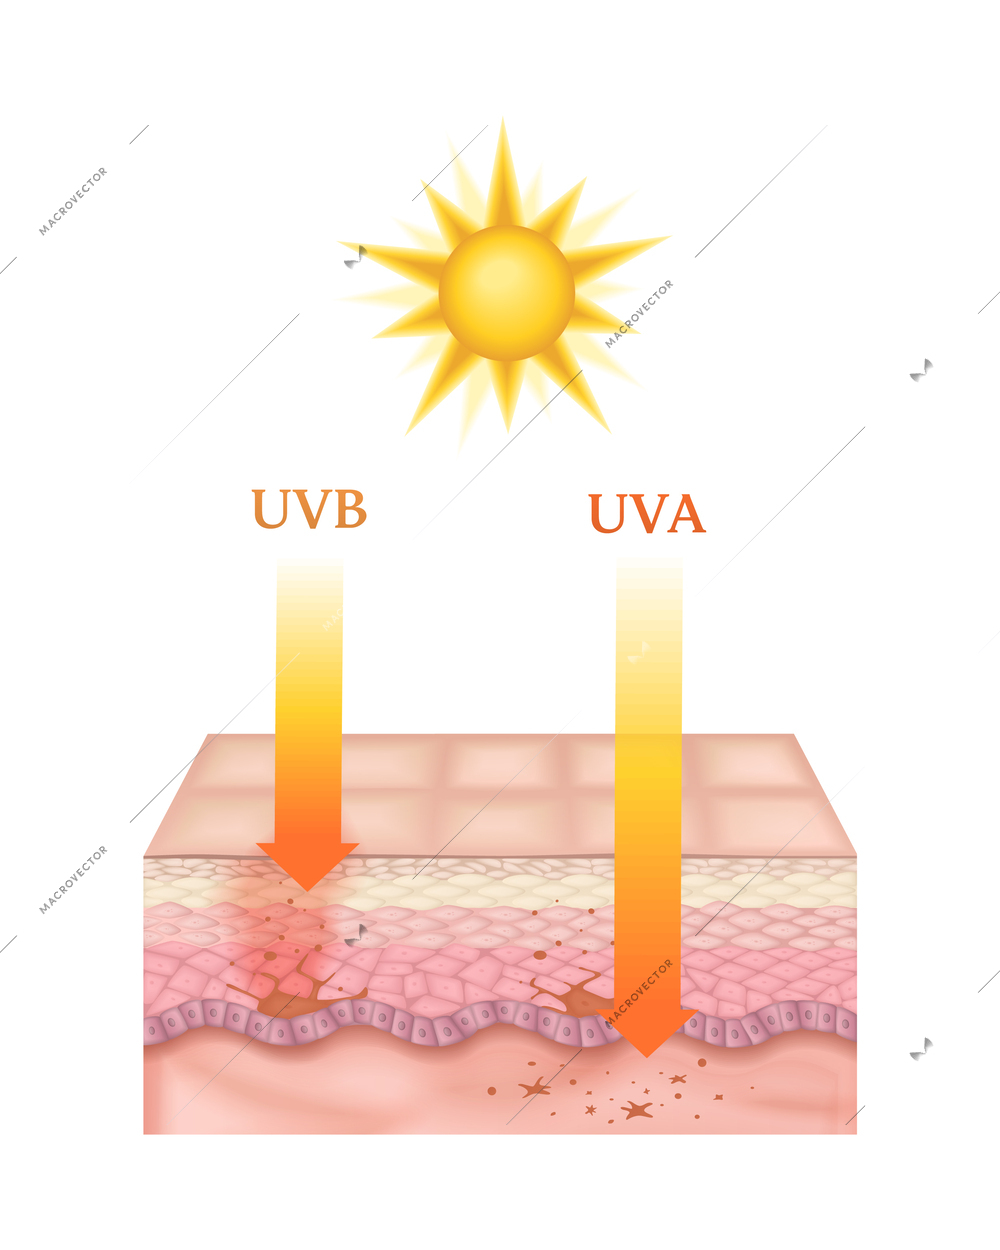 Realistic cross section of human skin layers affected by uva and uva sun rays vector illustration